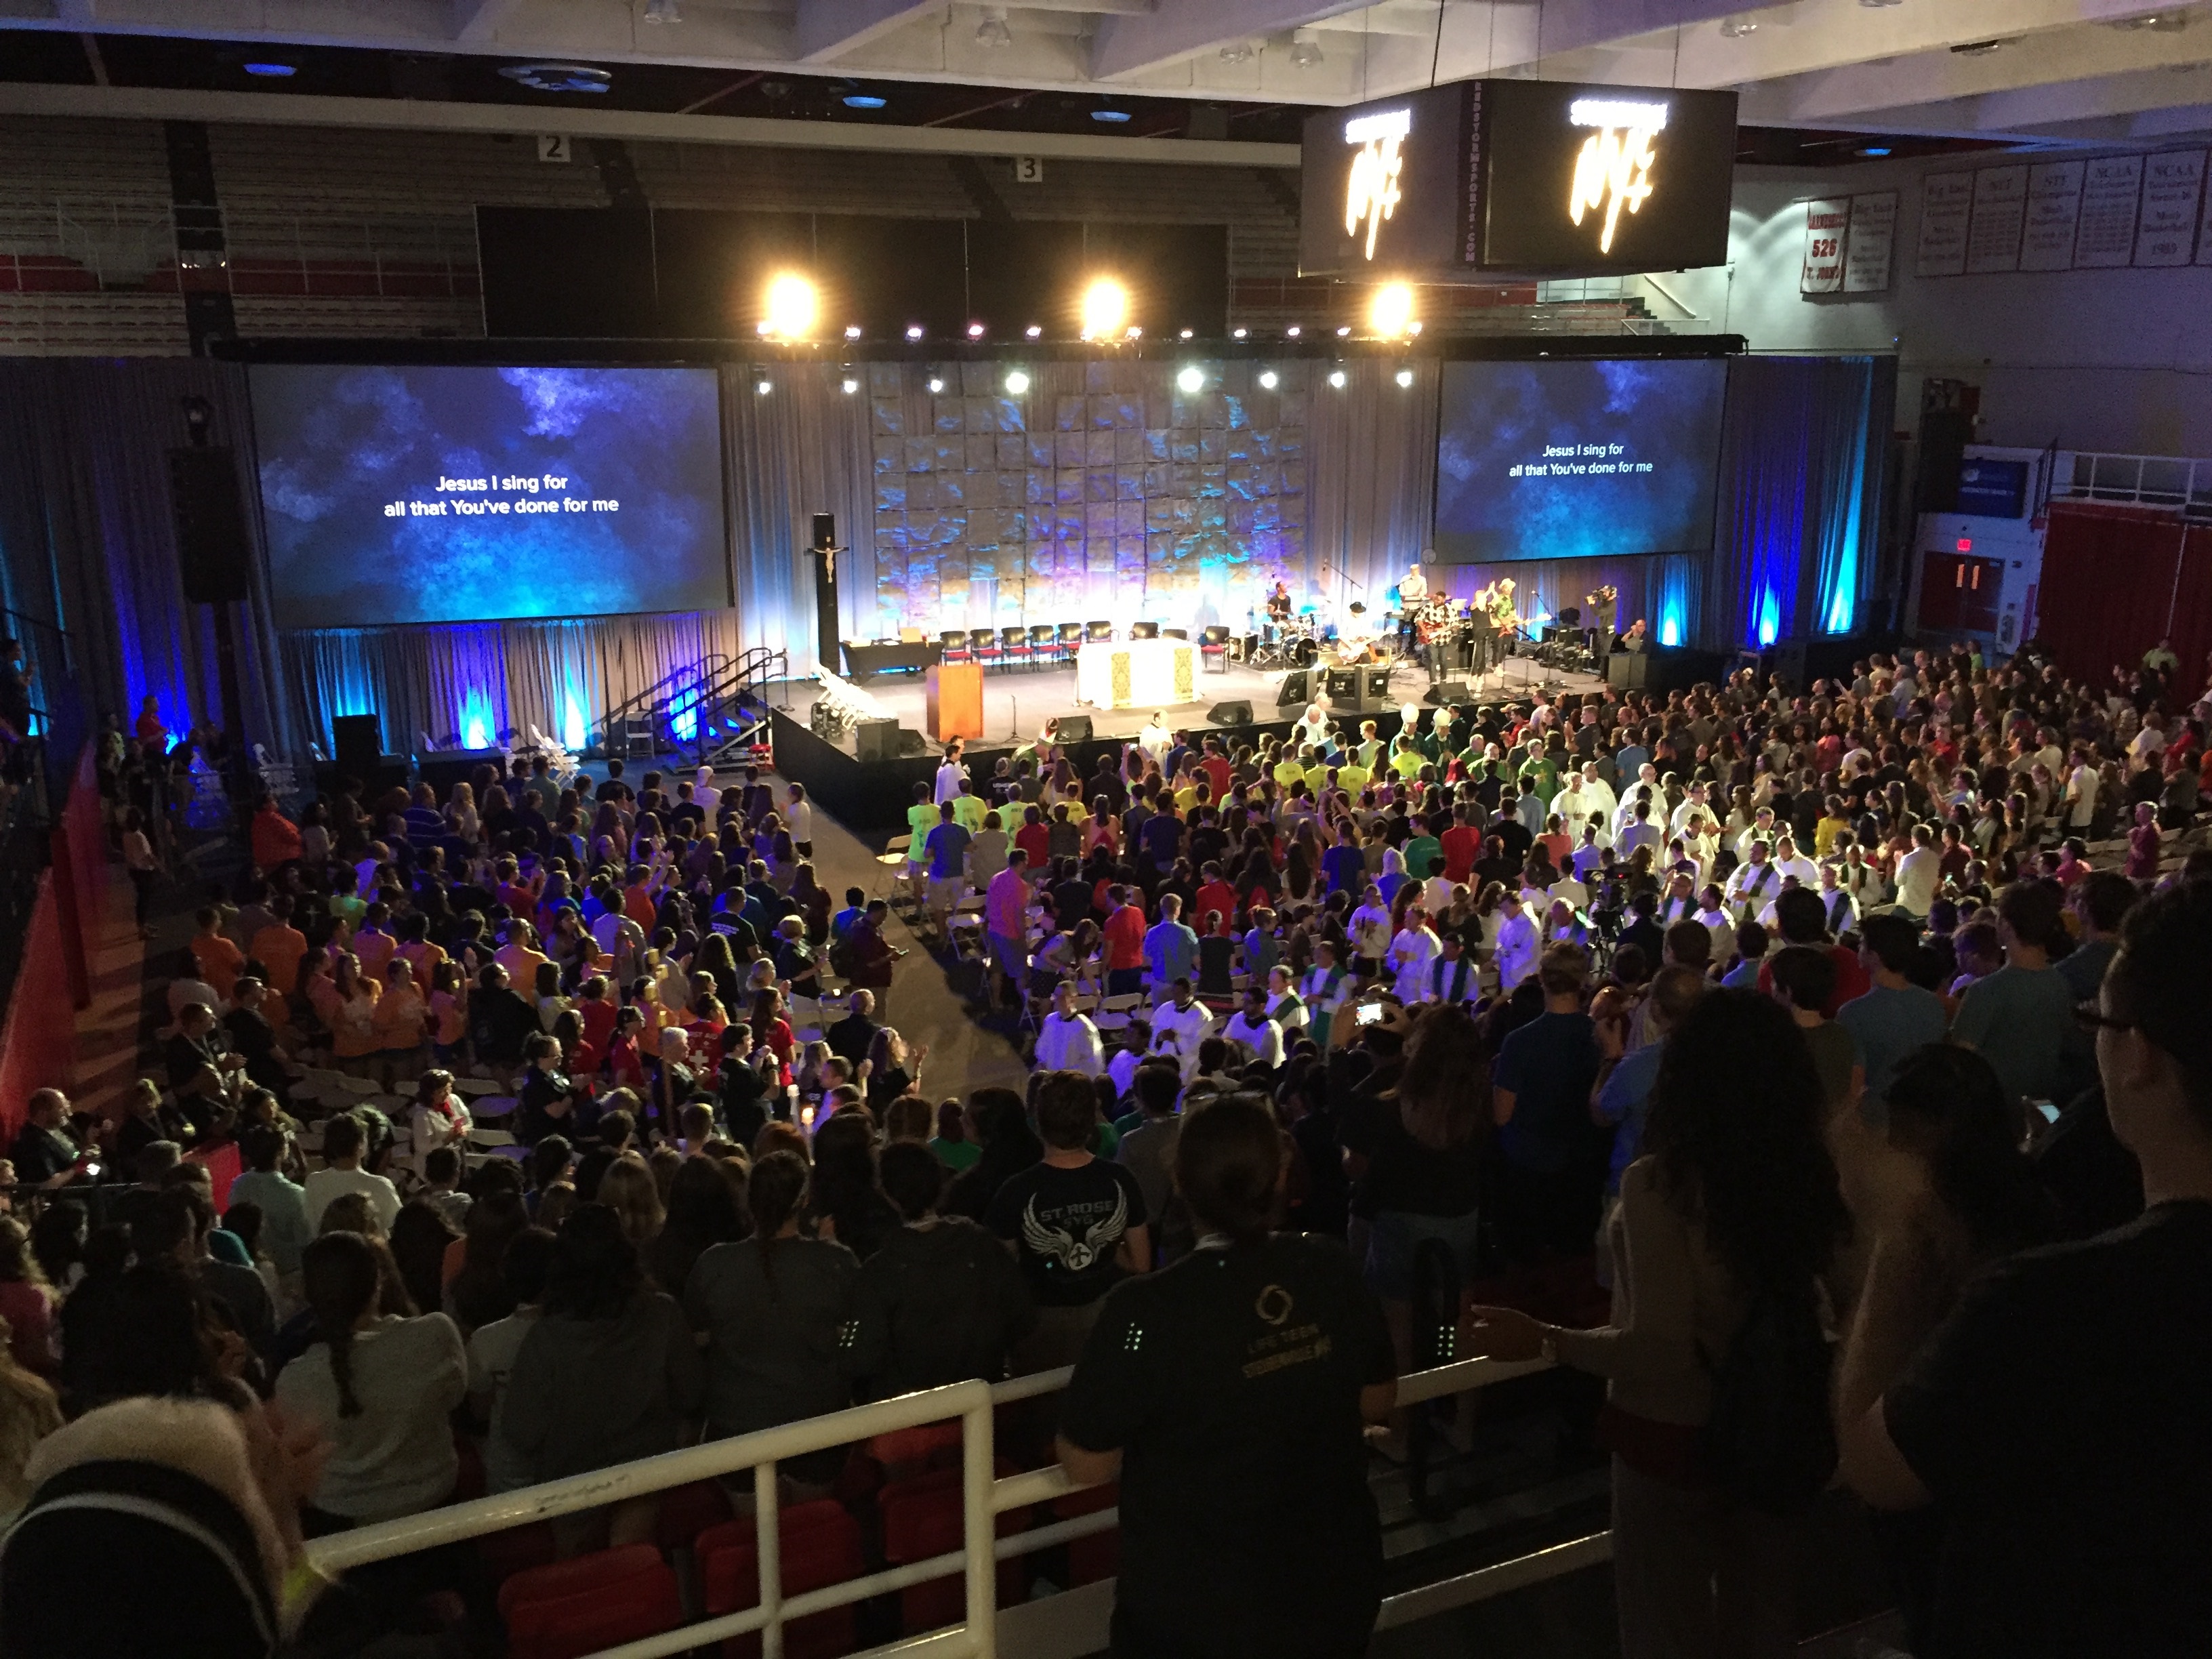 Finding God in song (and breakdancing) at the Steubenville Youth